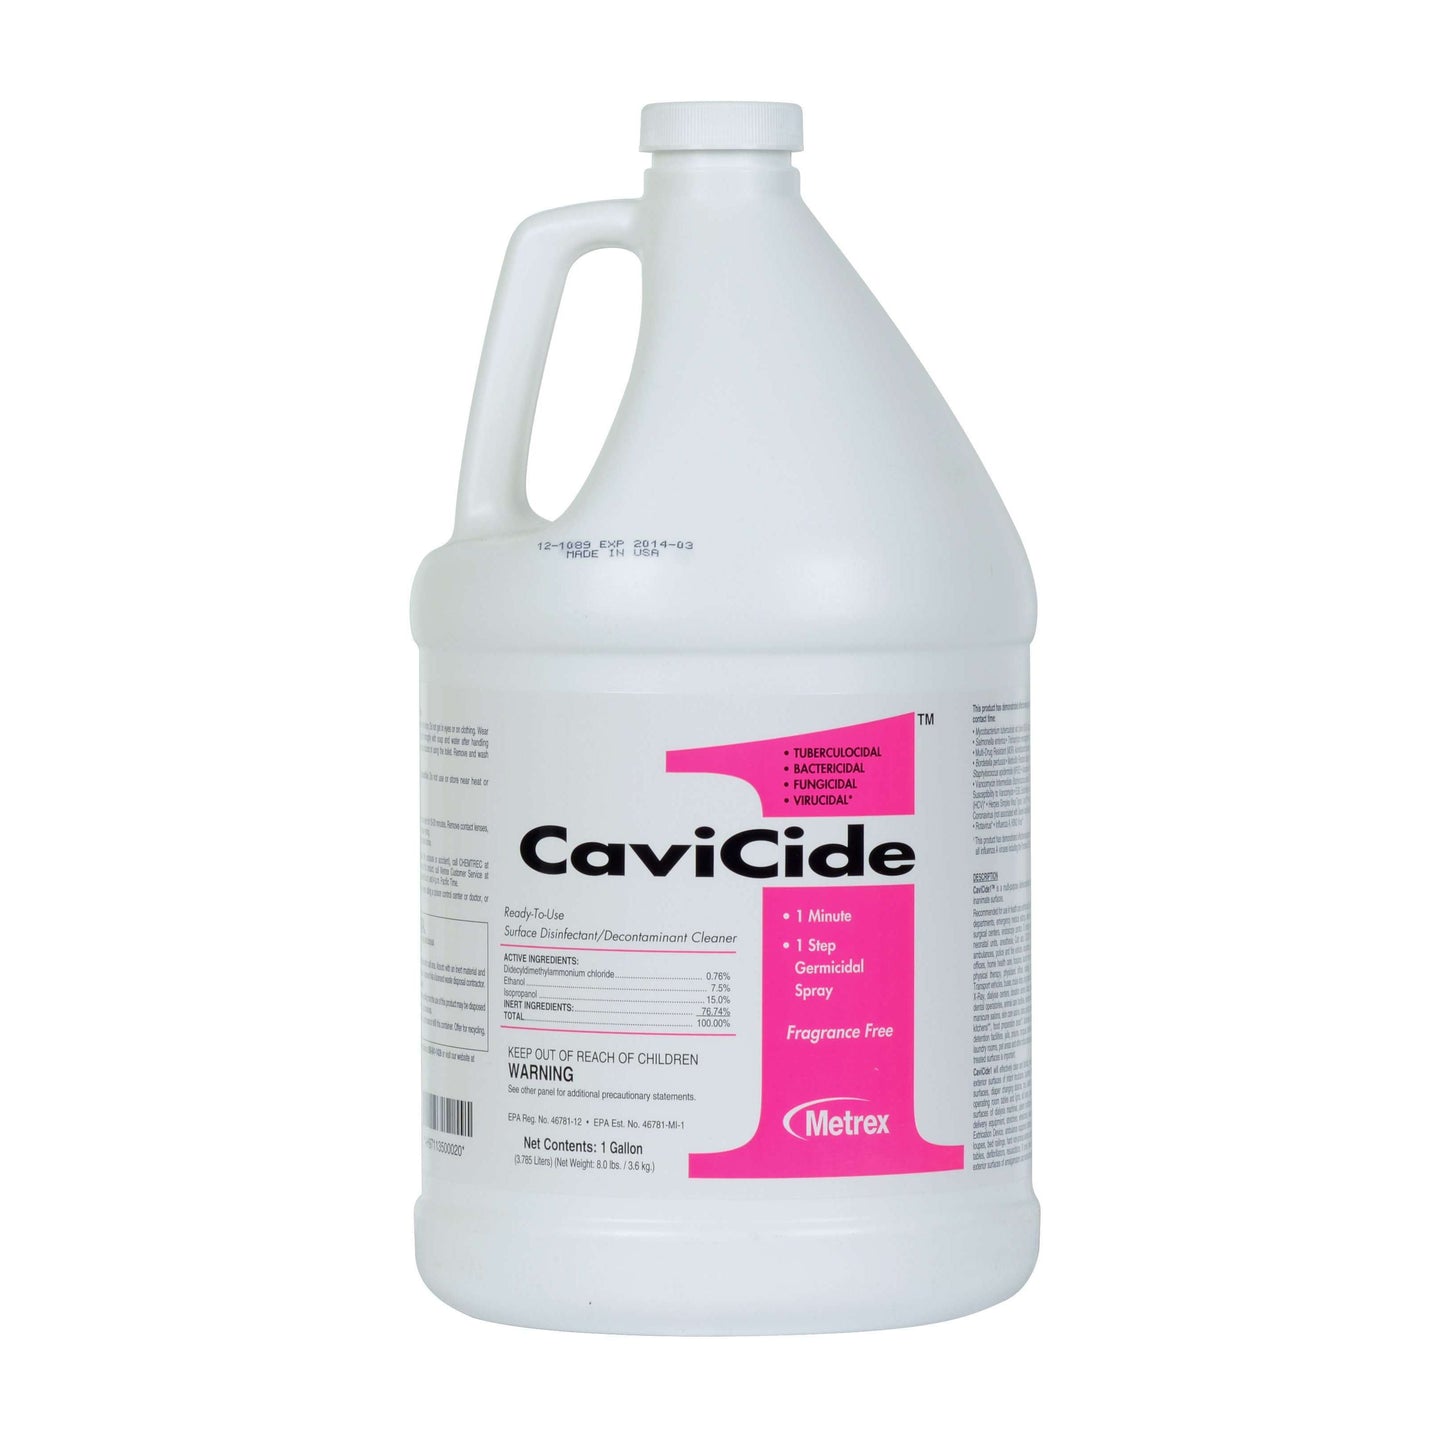 Metrex 13-5000 Cavicide1 Alcohol Based Surface Disinfectant gallon